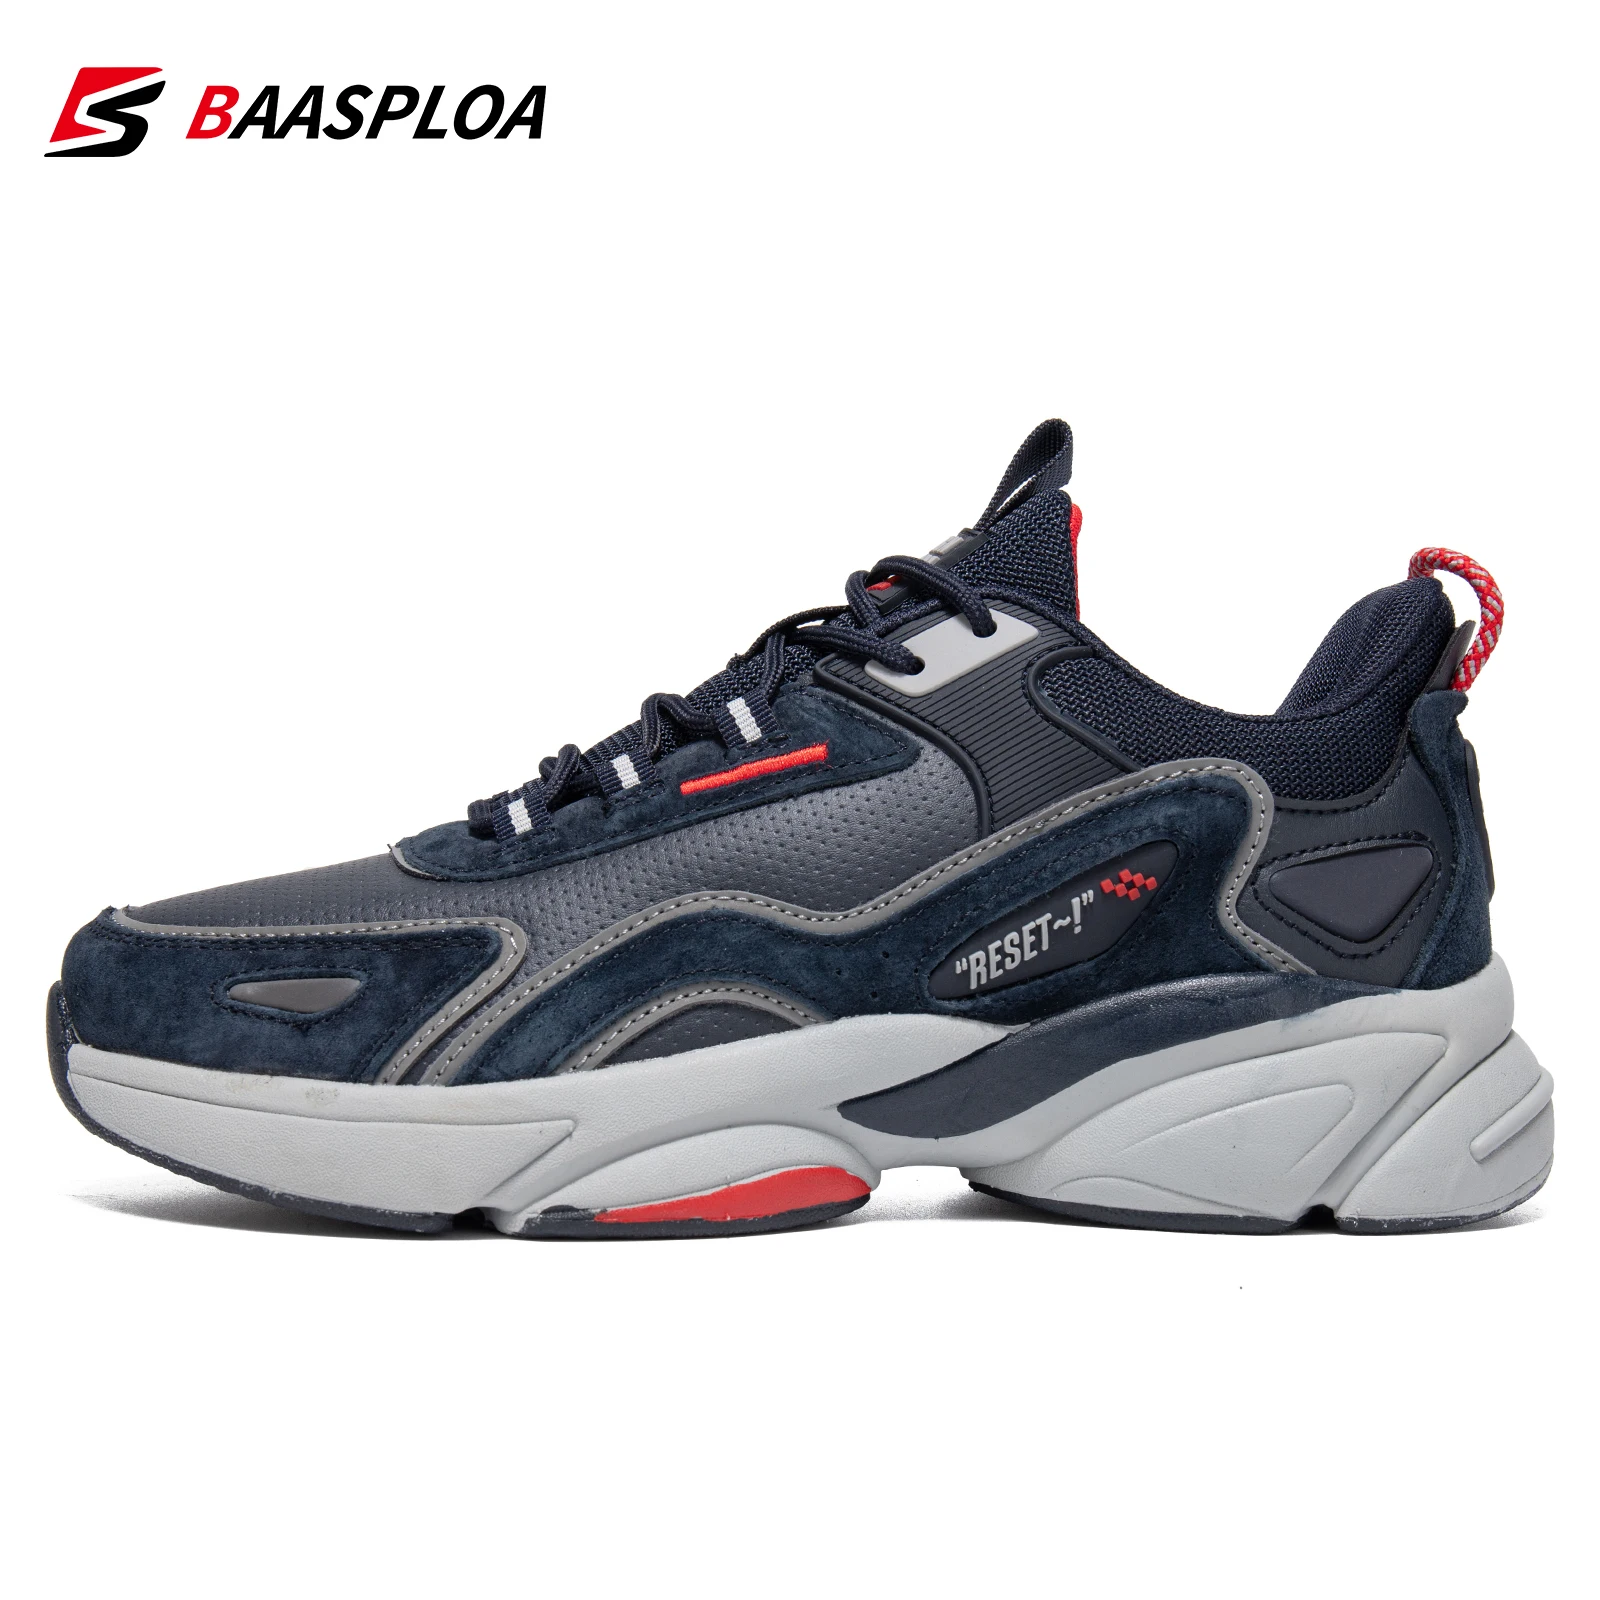 Baasploa Lightweight Running Shoes For Men 2022 Men's Designer Leather Casual Sneakers Lace Up Male Outdoor Sports Shoe Tennis